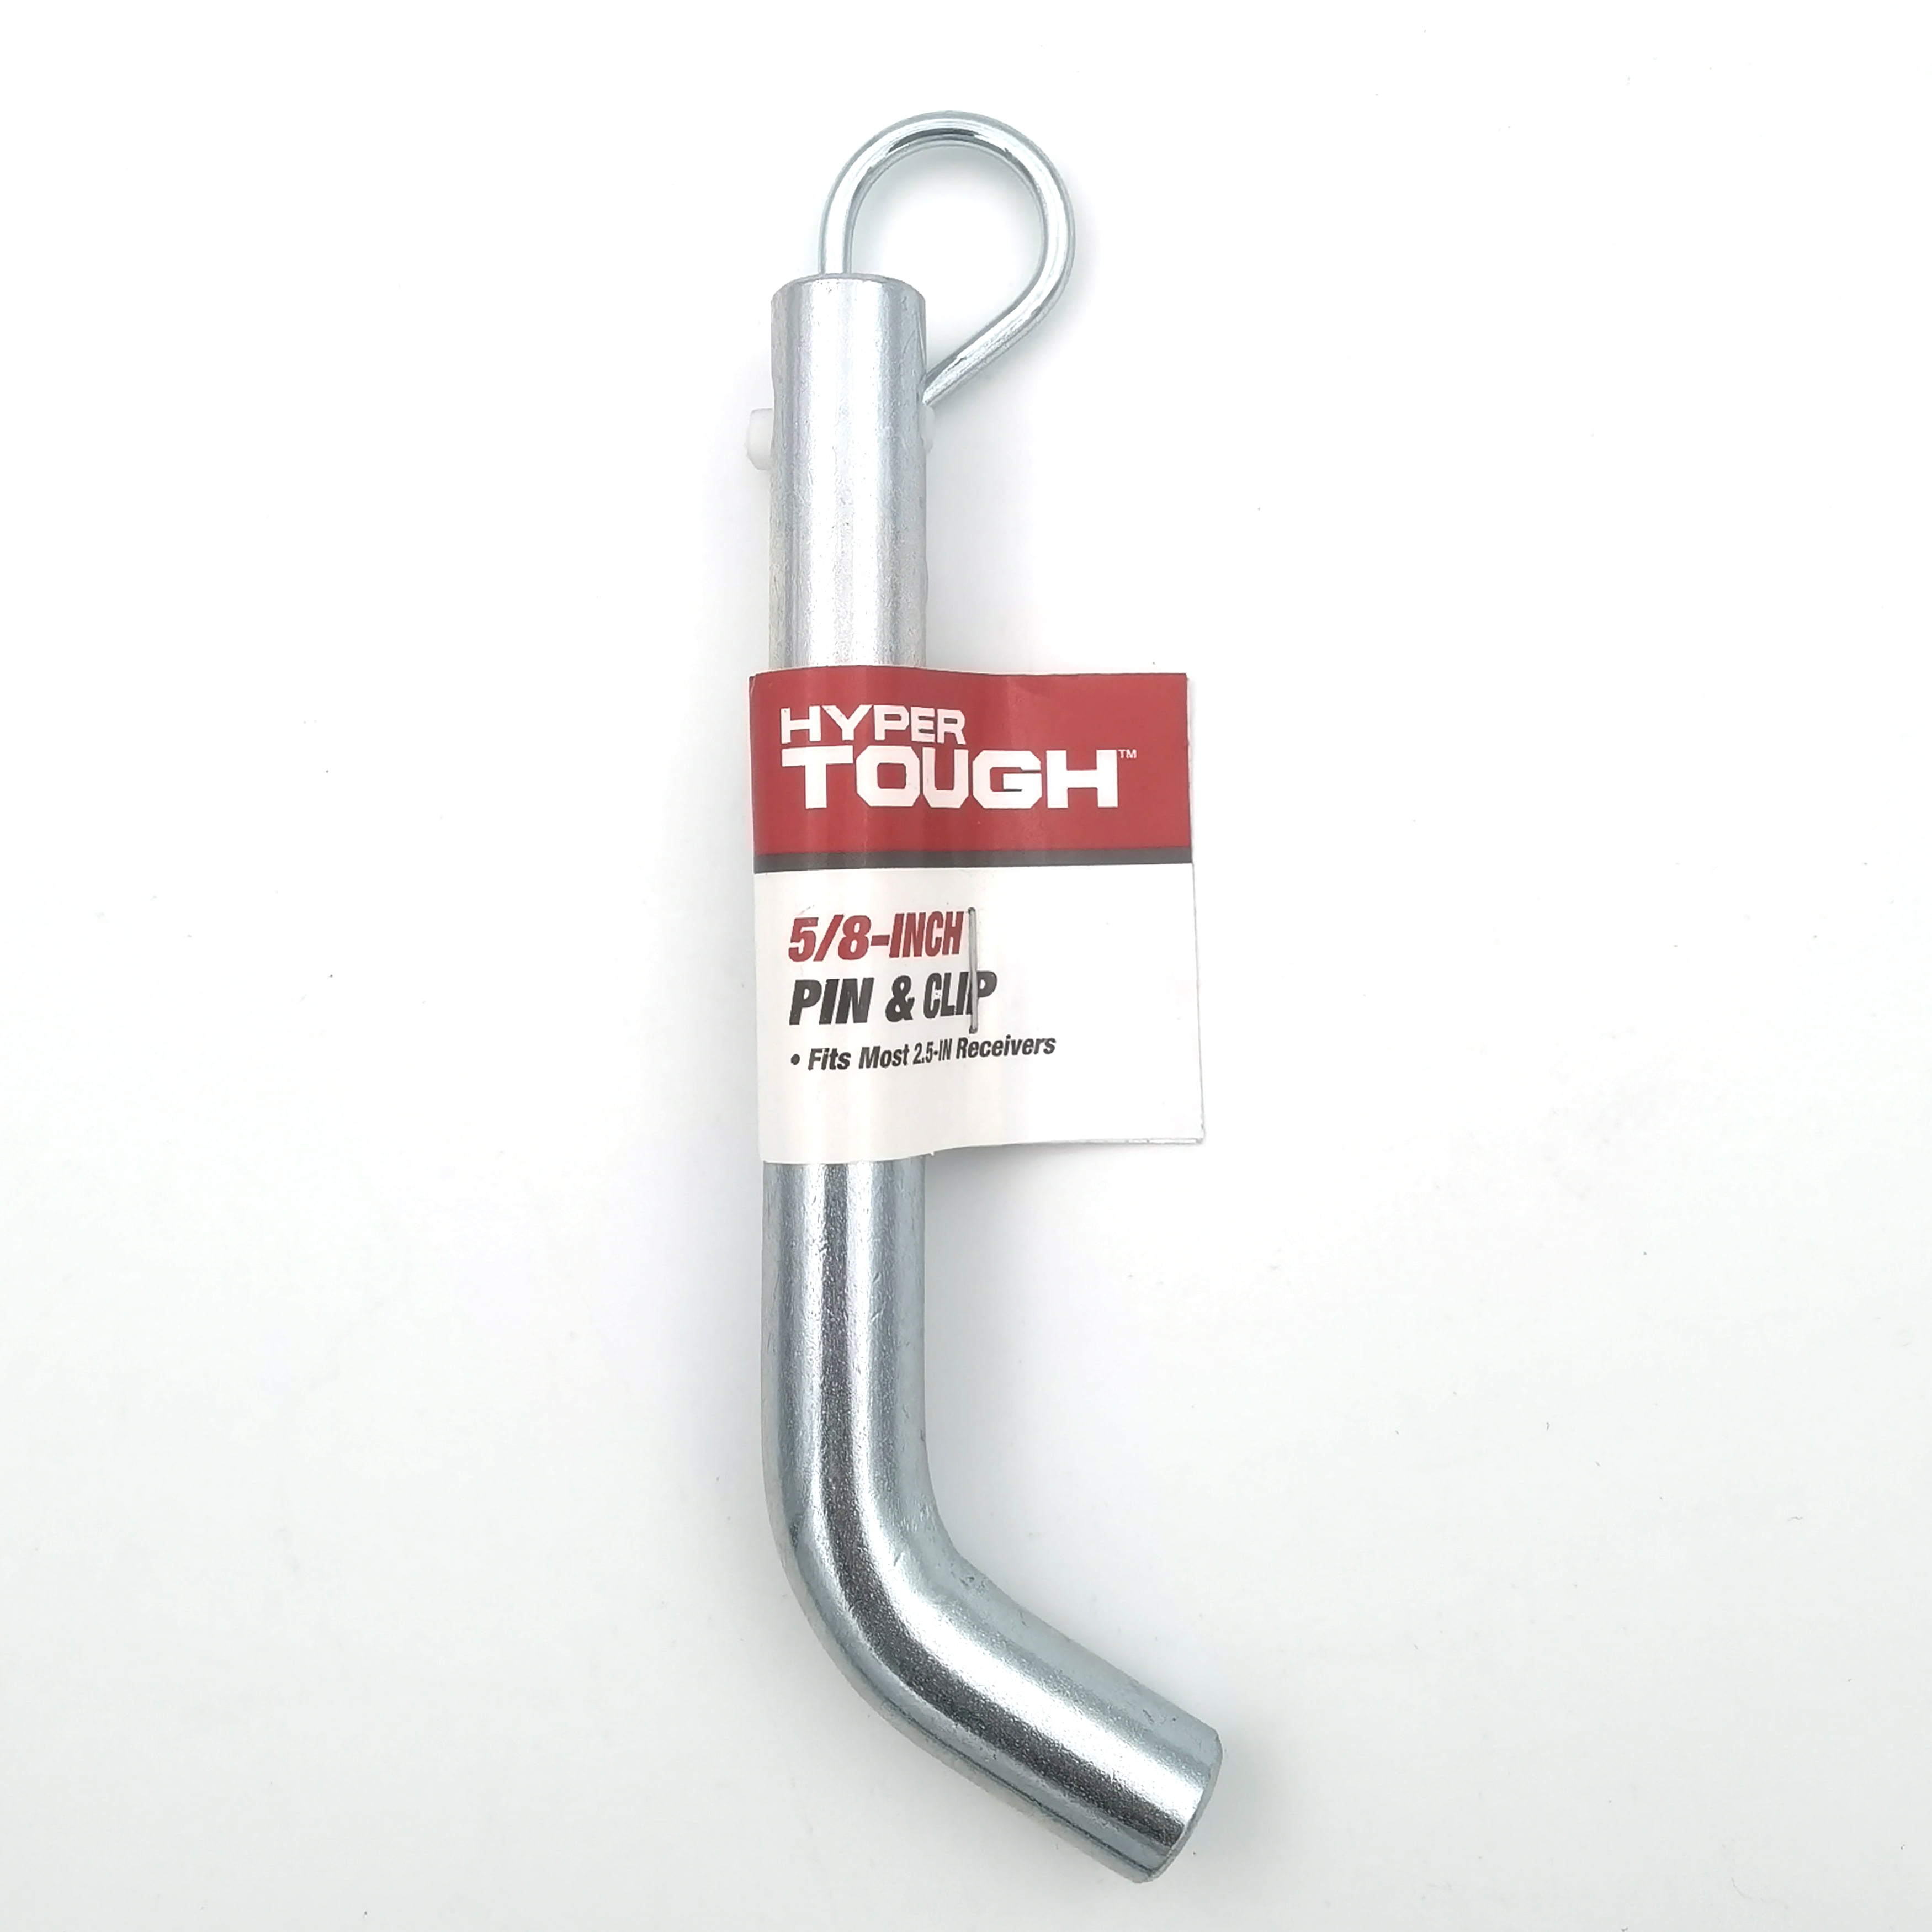 Hyper Tough 5/8 inch Hitch Pin and Clip with Clip Hole, Trailer